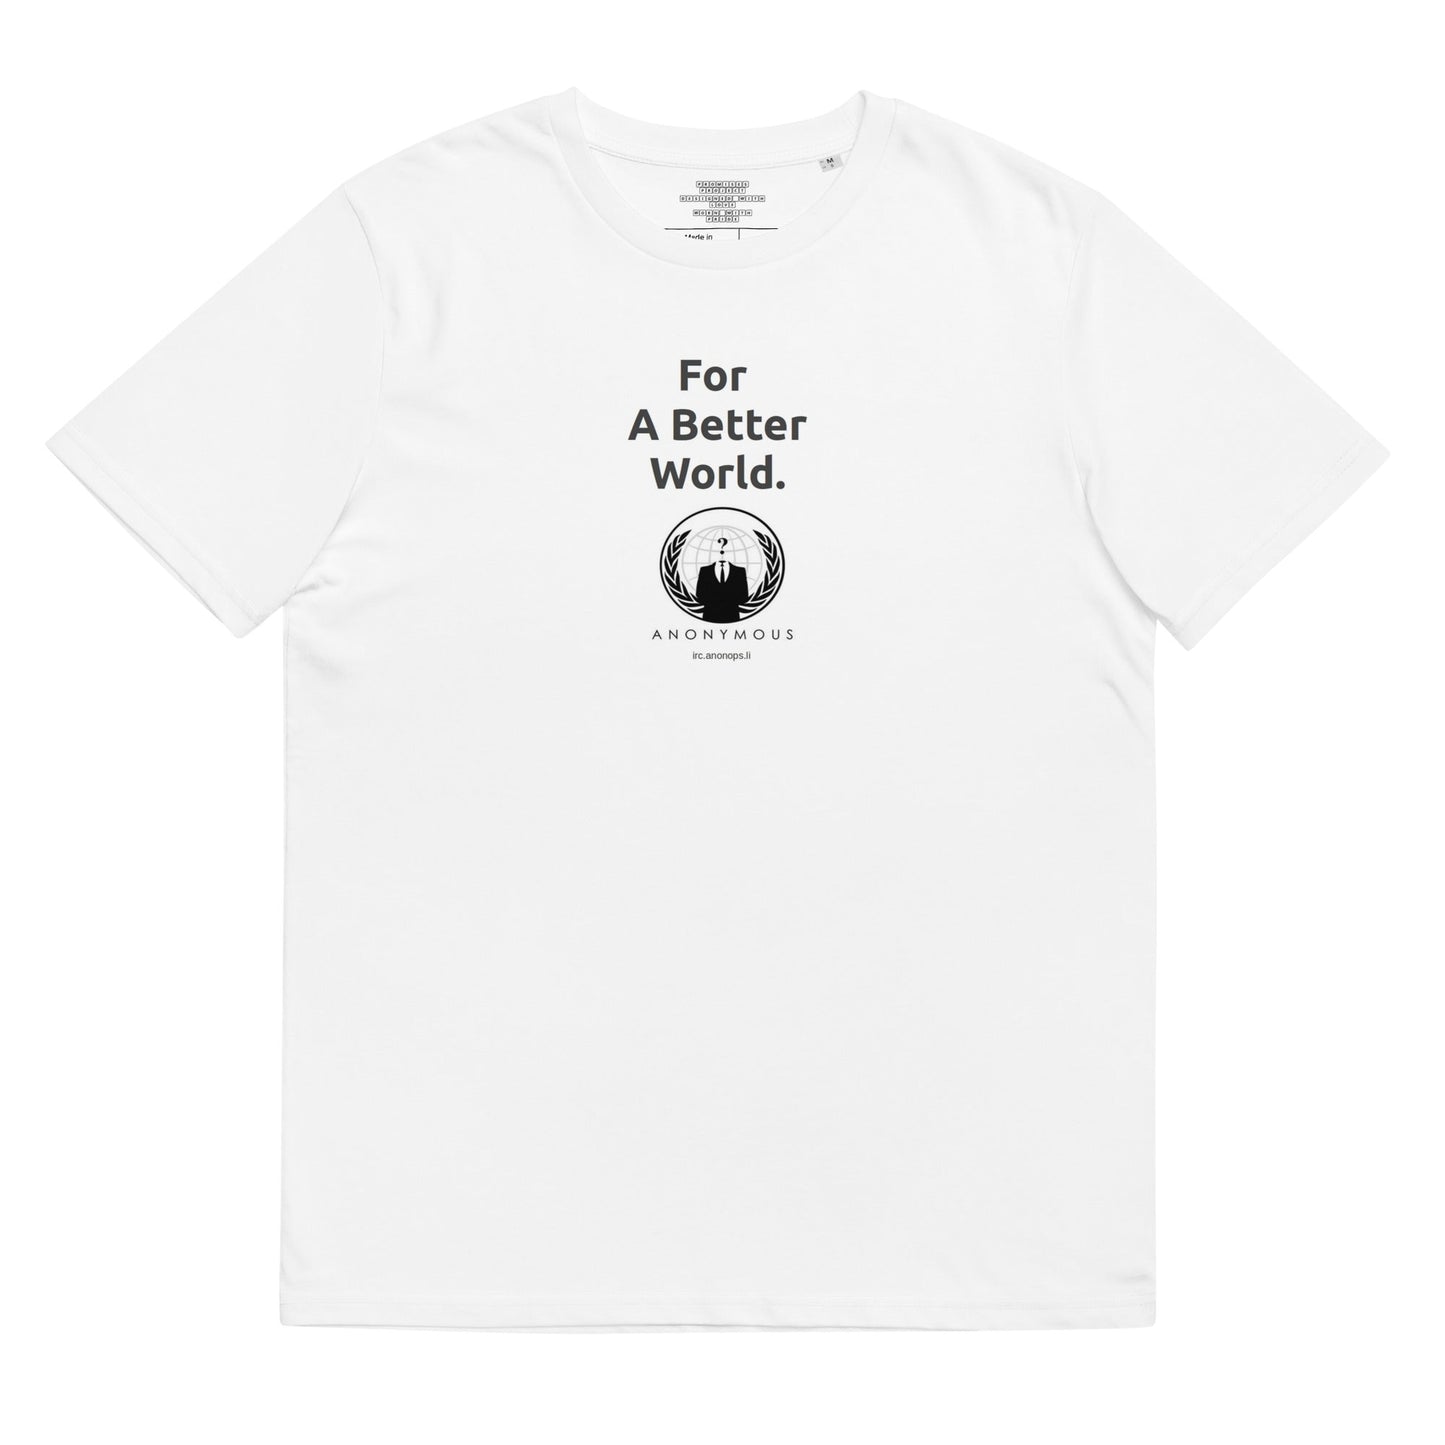 For a Better World - Unisex organic cotton t-shirt - Souled Out World